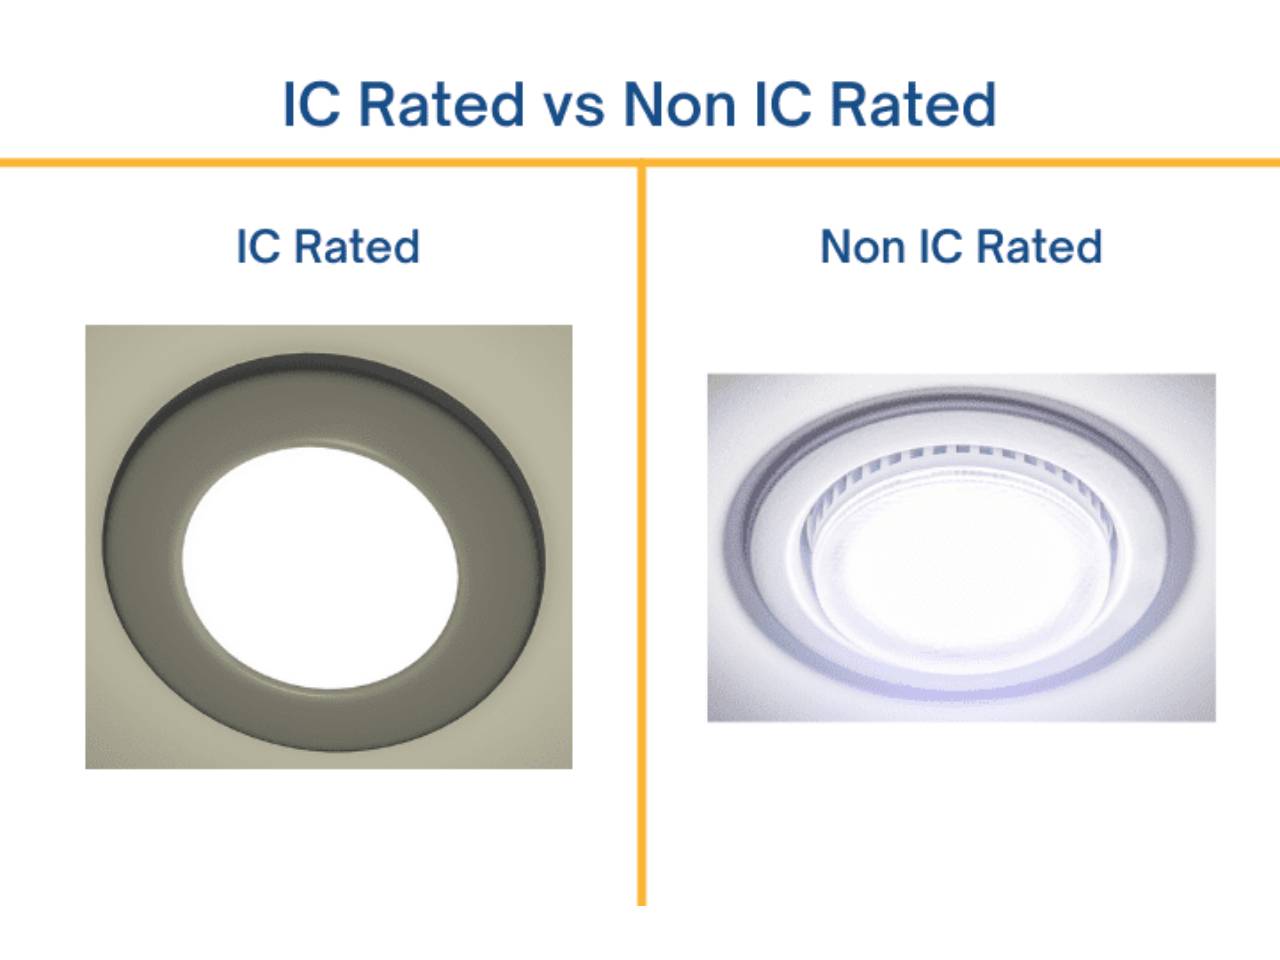 IC Rated vs Non IC Rated lights